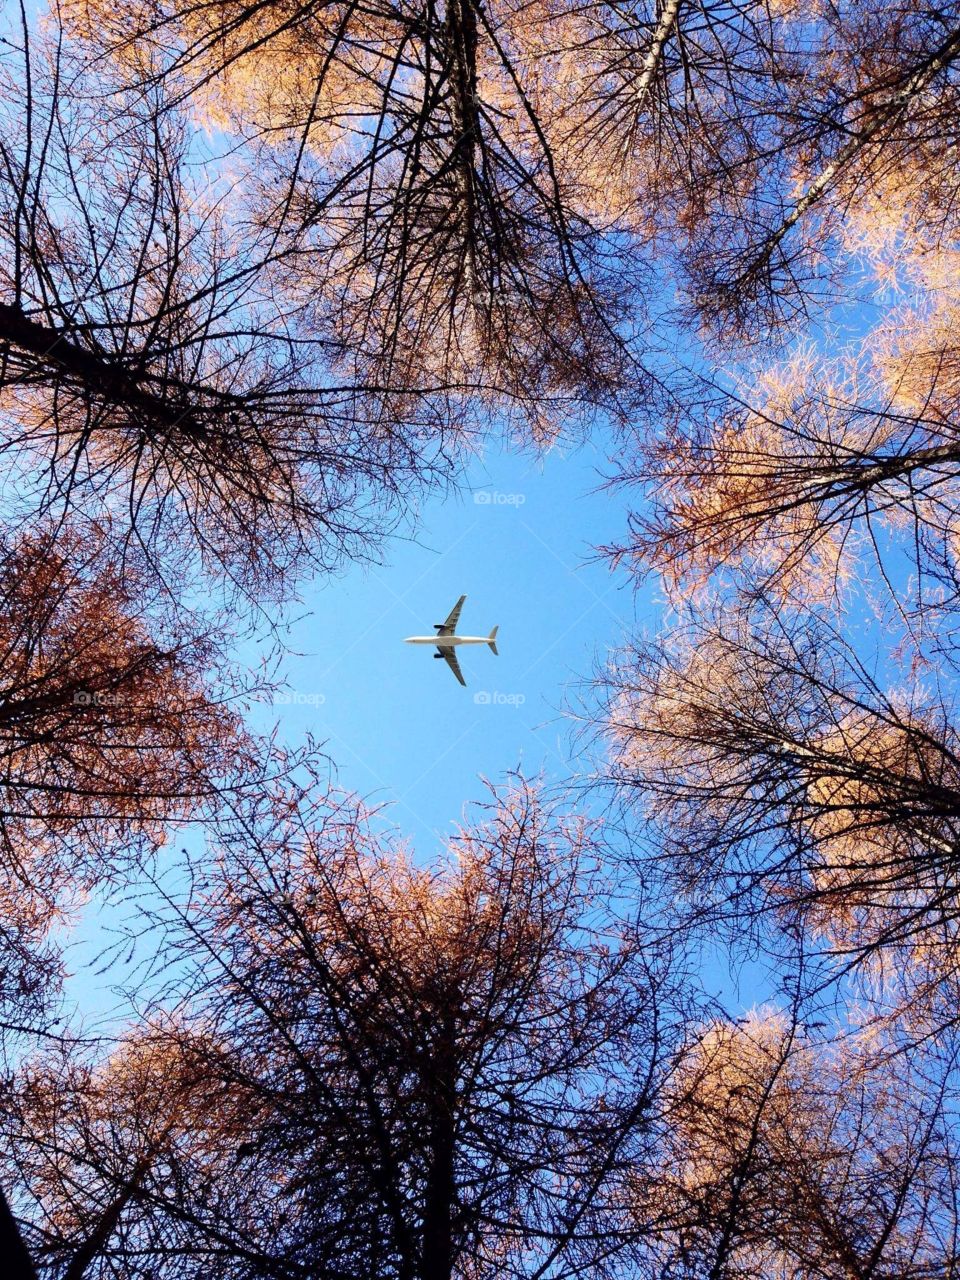 aircraft and woods